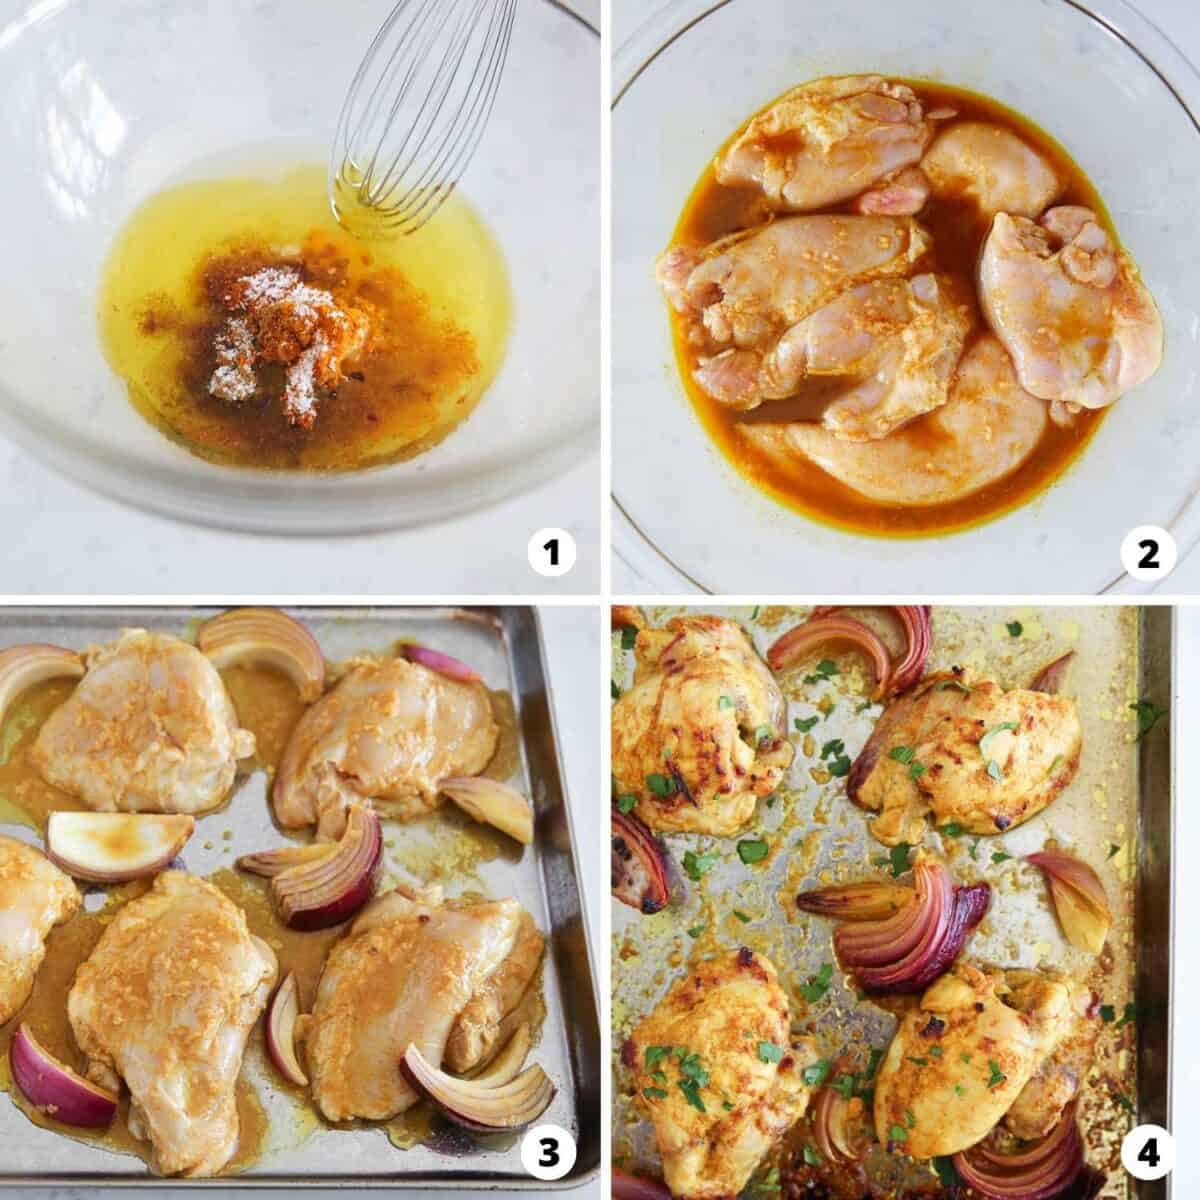 Step by step collage making chicken shawarma.